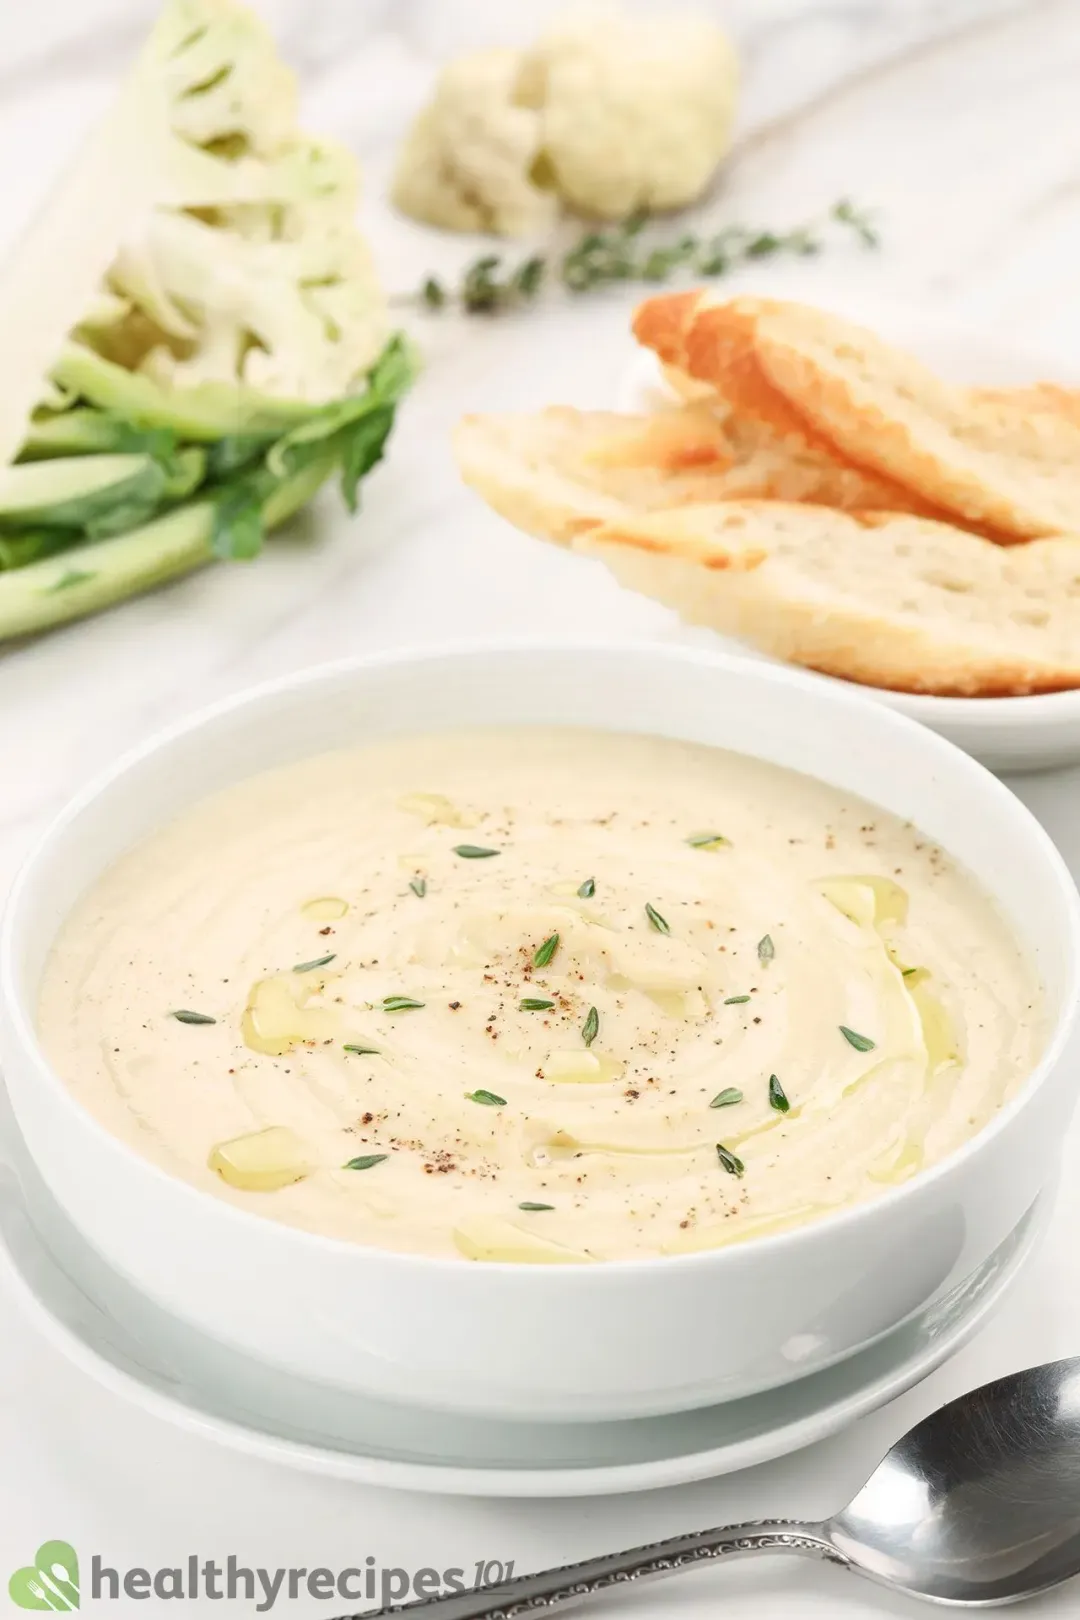 What to Serve With Cauliflower Soup